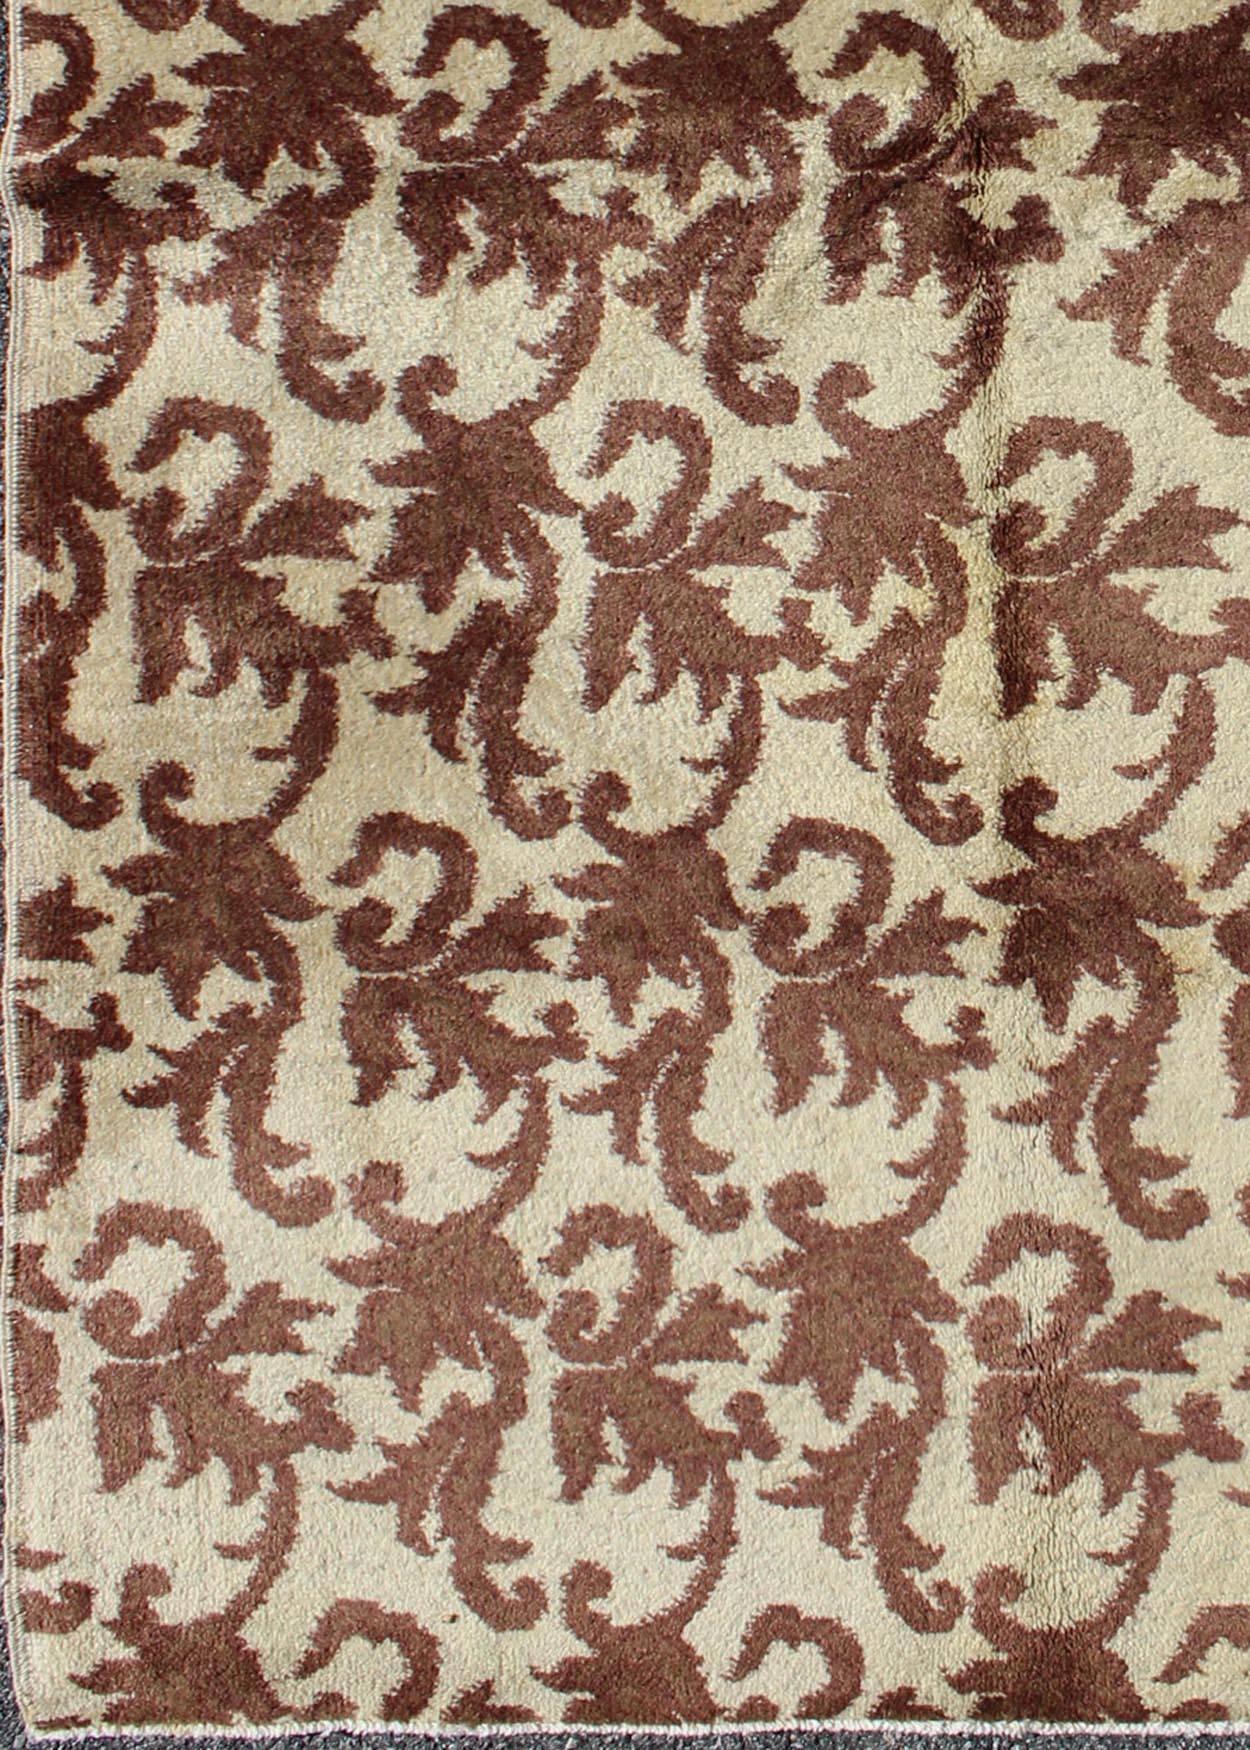 Measures: 3'11 x 6'11.
Rendered in an gray/taupe background with a spotted and speckled assortment of brown color, this unique Art Deco design rug has an all over repeating Design. 

Art Deco design turkish rug with a modern design, rug